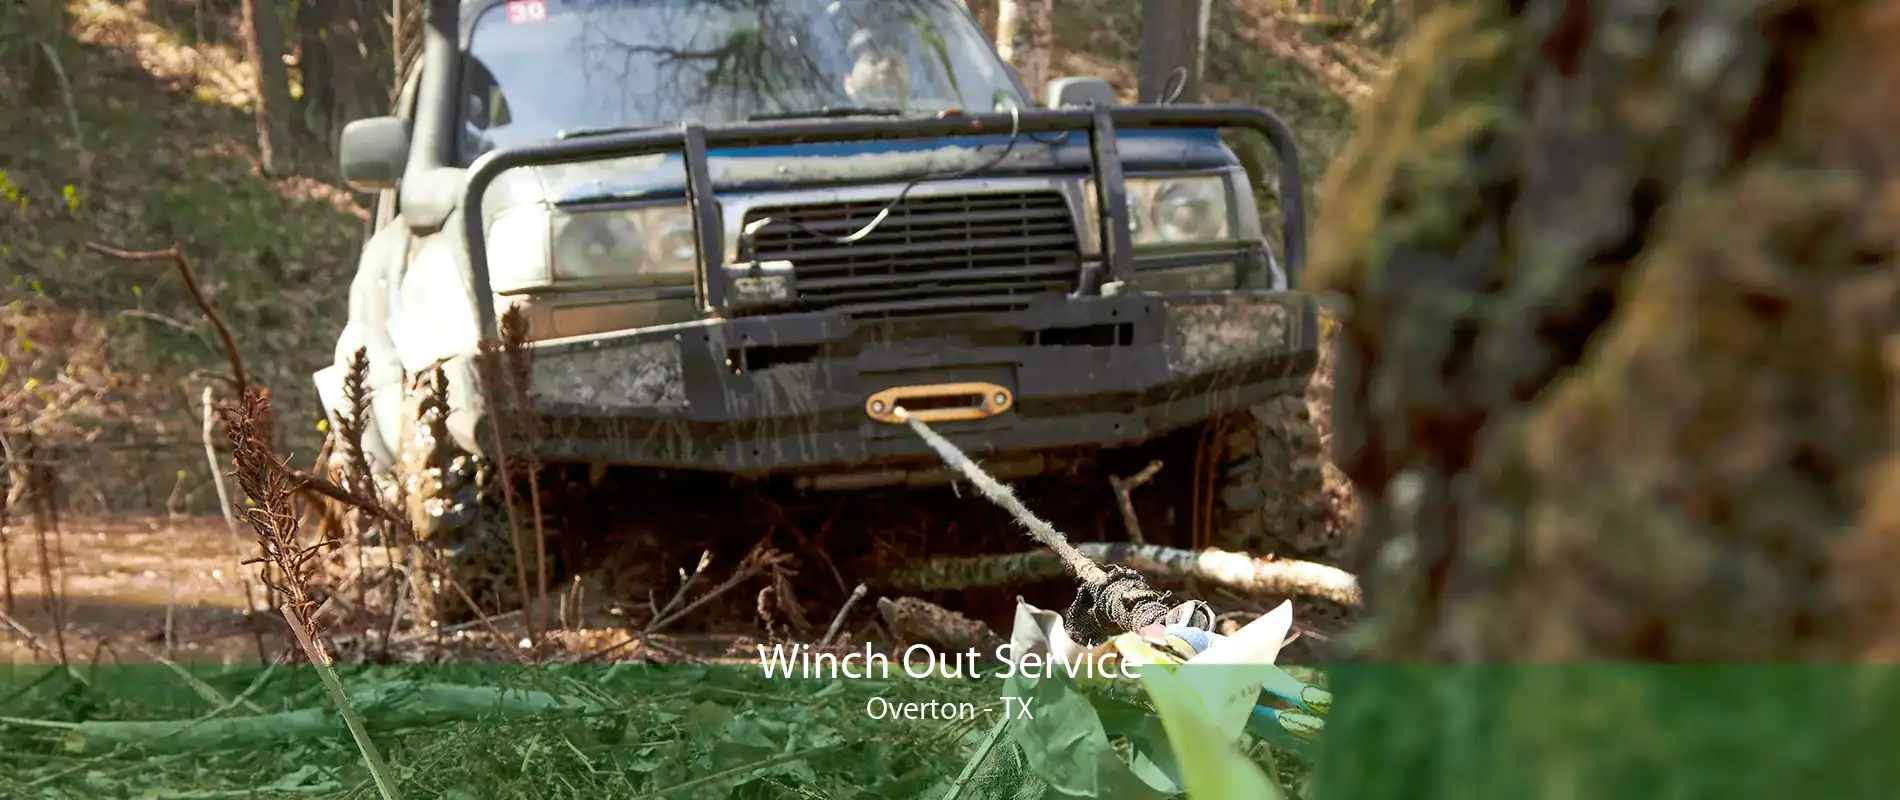 Winch Out Service Overton - TX